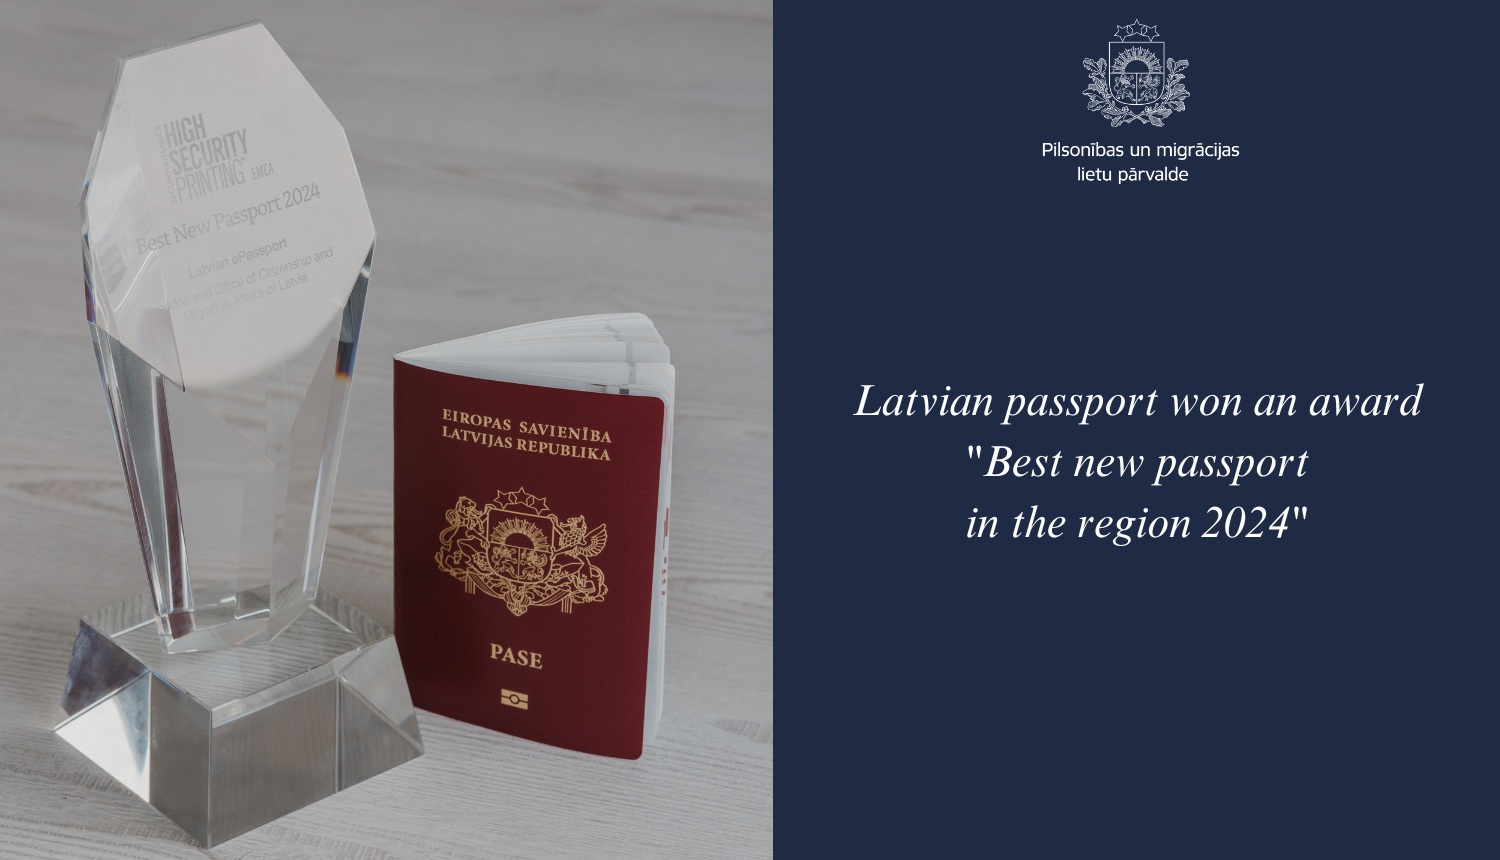 Text: the best new passport in the region 2024" and picture of the award